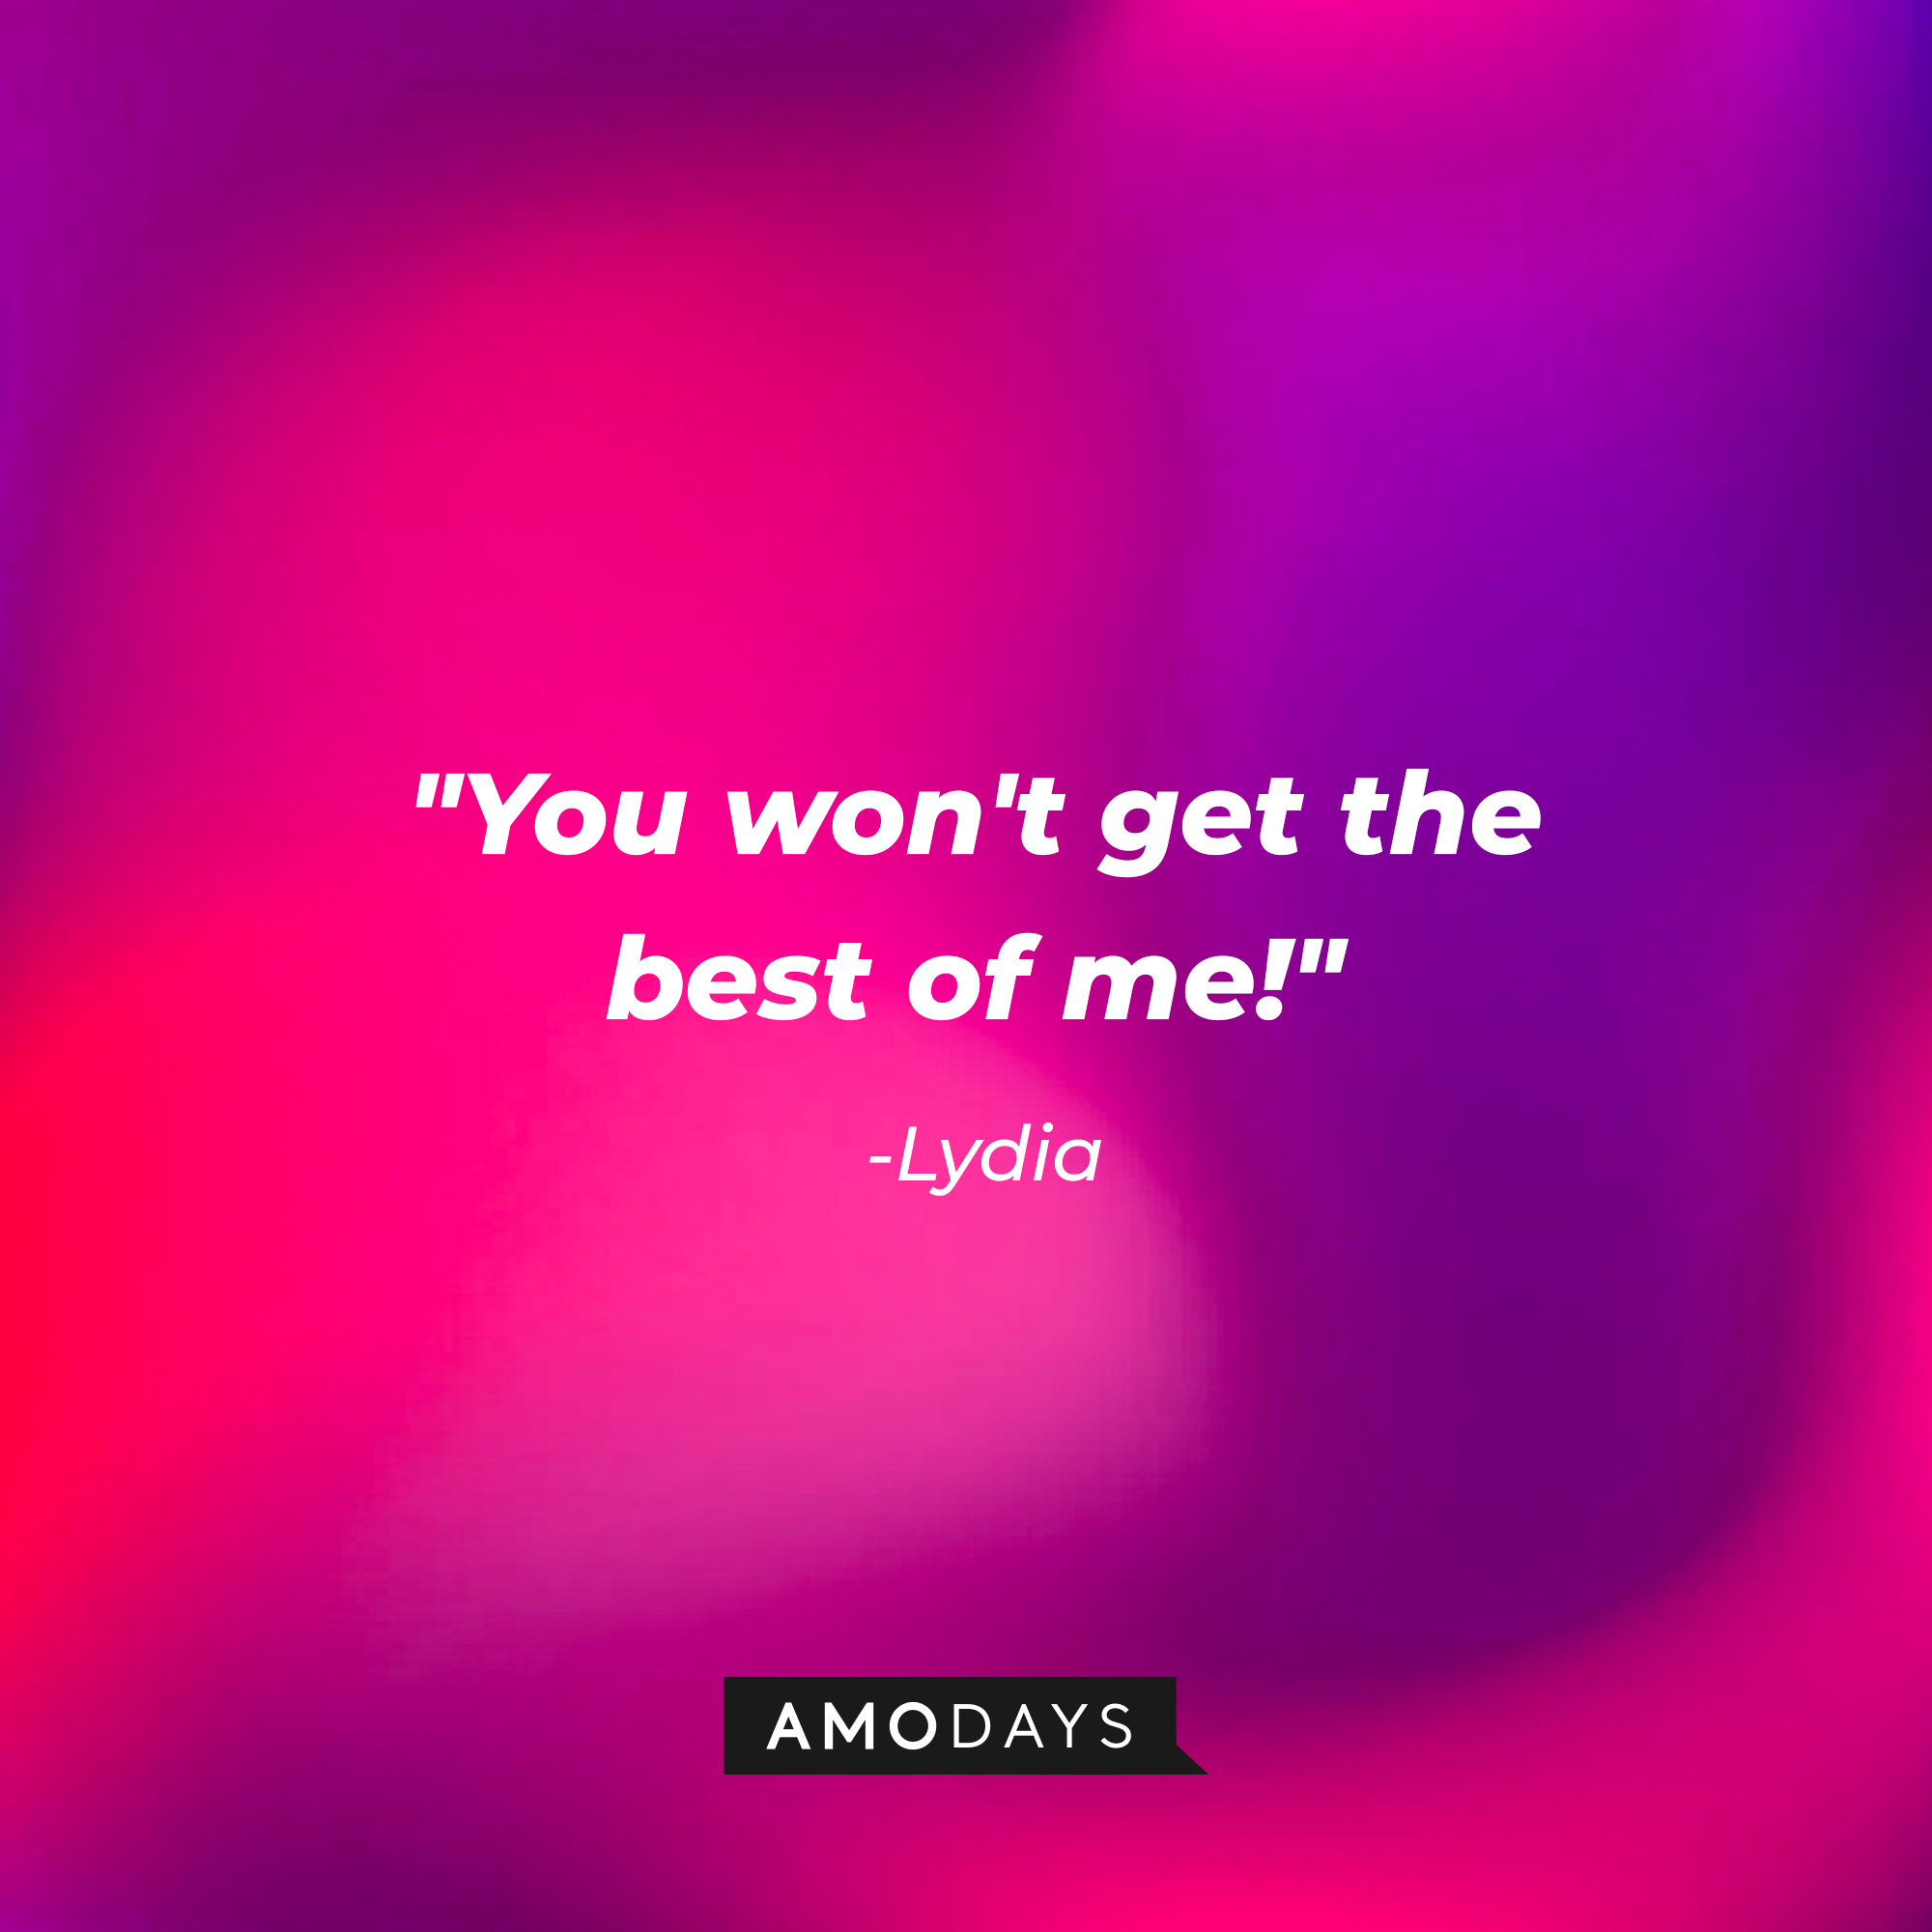 Lydia's quote: "You won't get the best of me!" | Source: Amodays